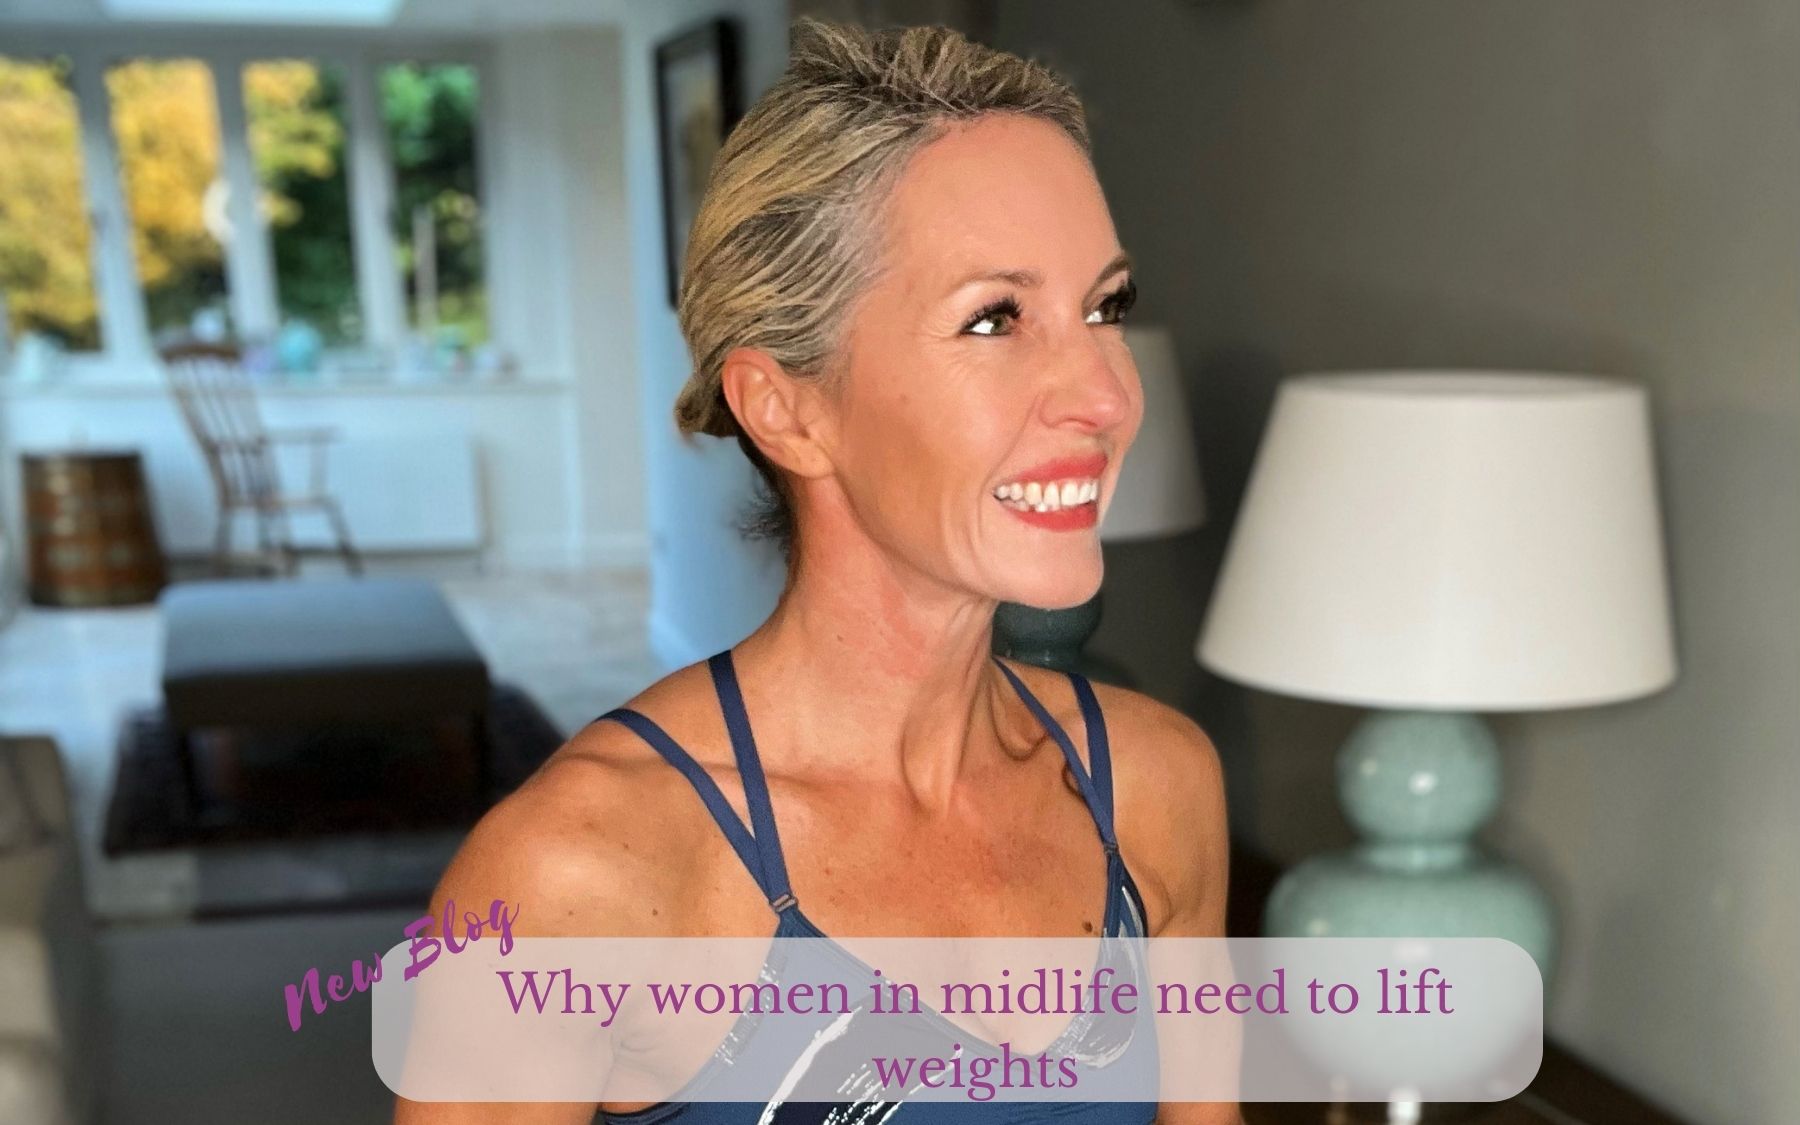 Why women in midlife need to lift weights